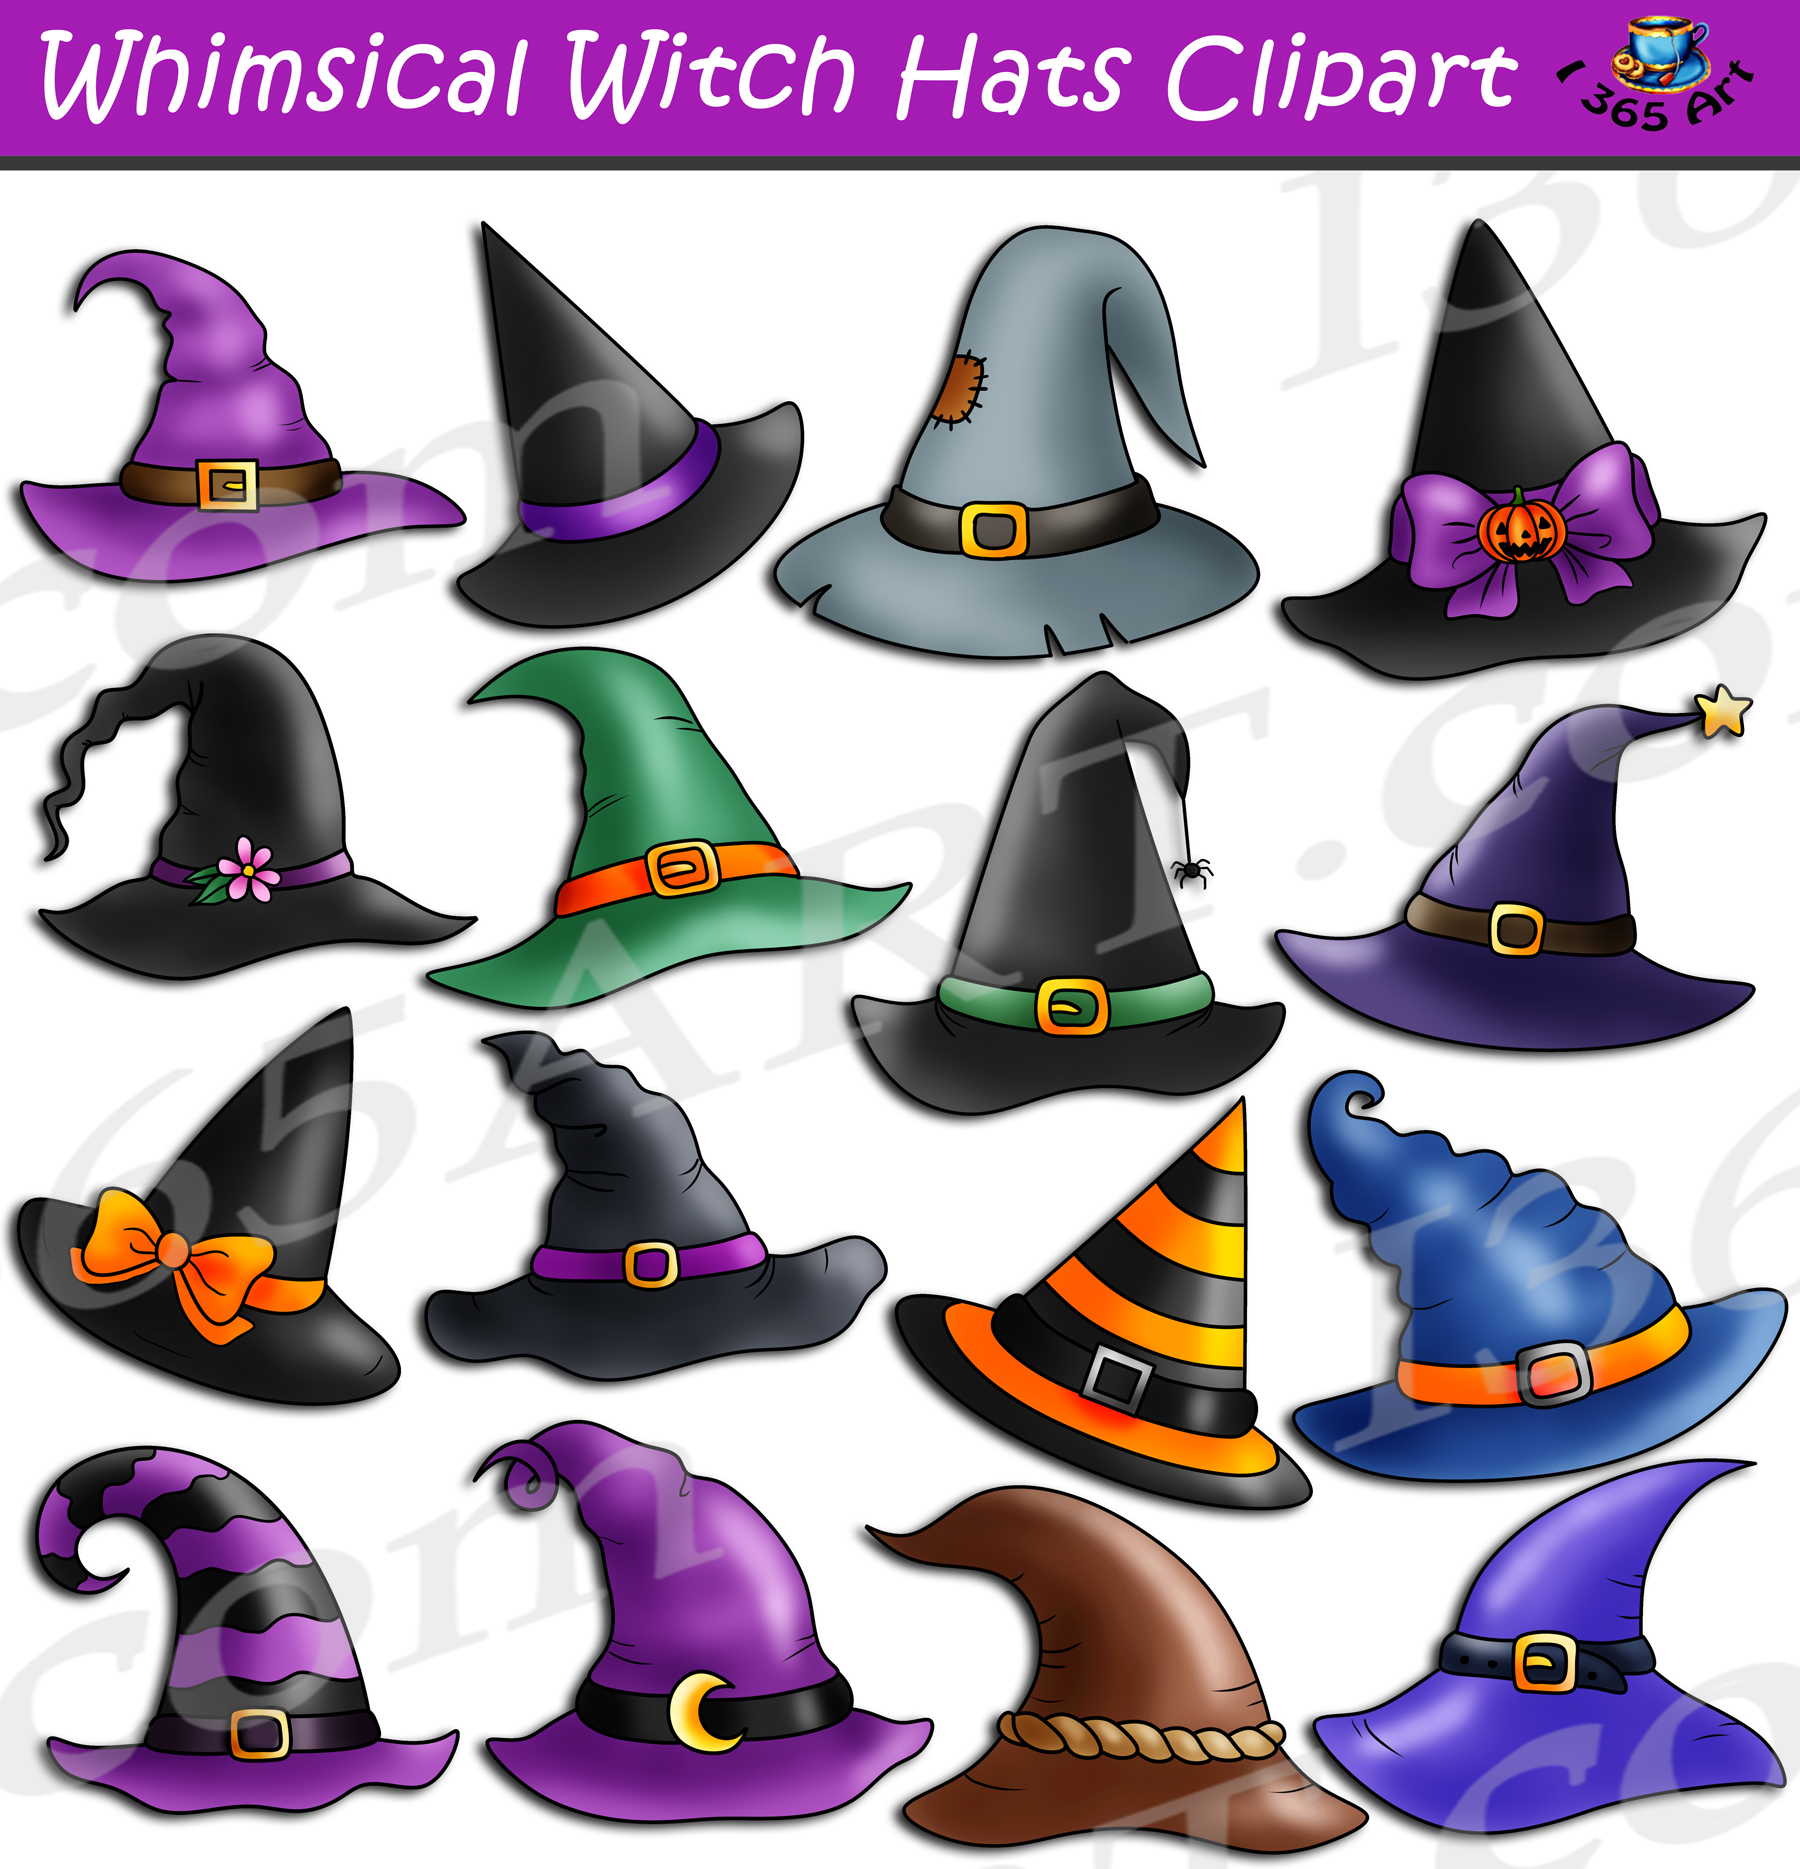 Halloween Witch Hats Clipart Download - Clipart 4 School